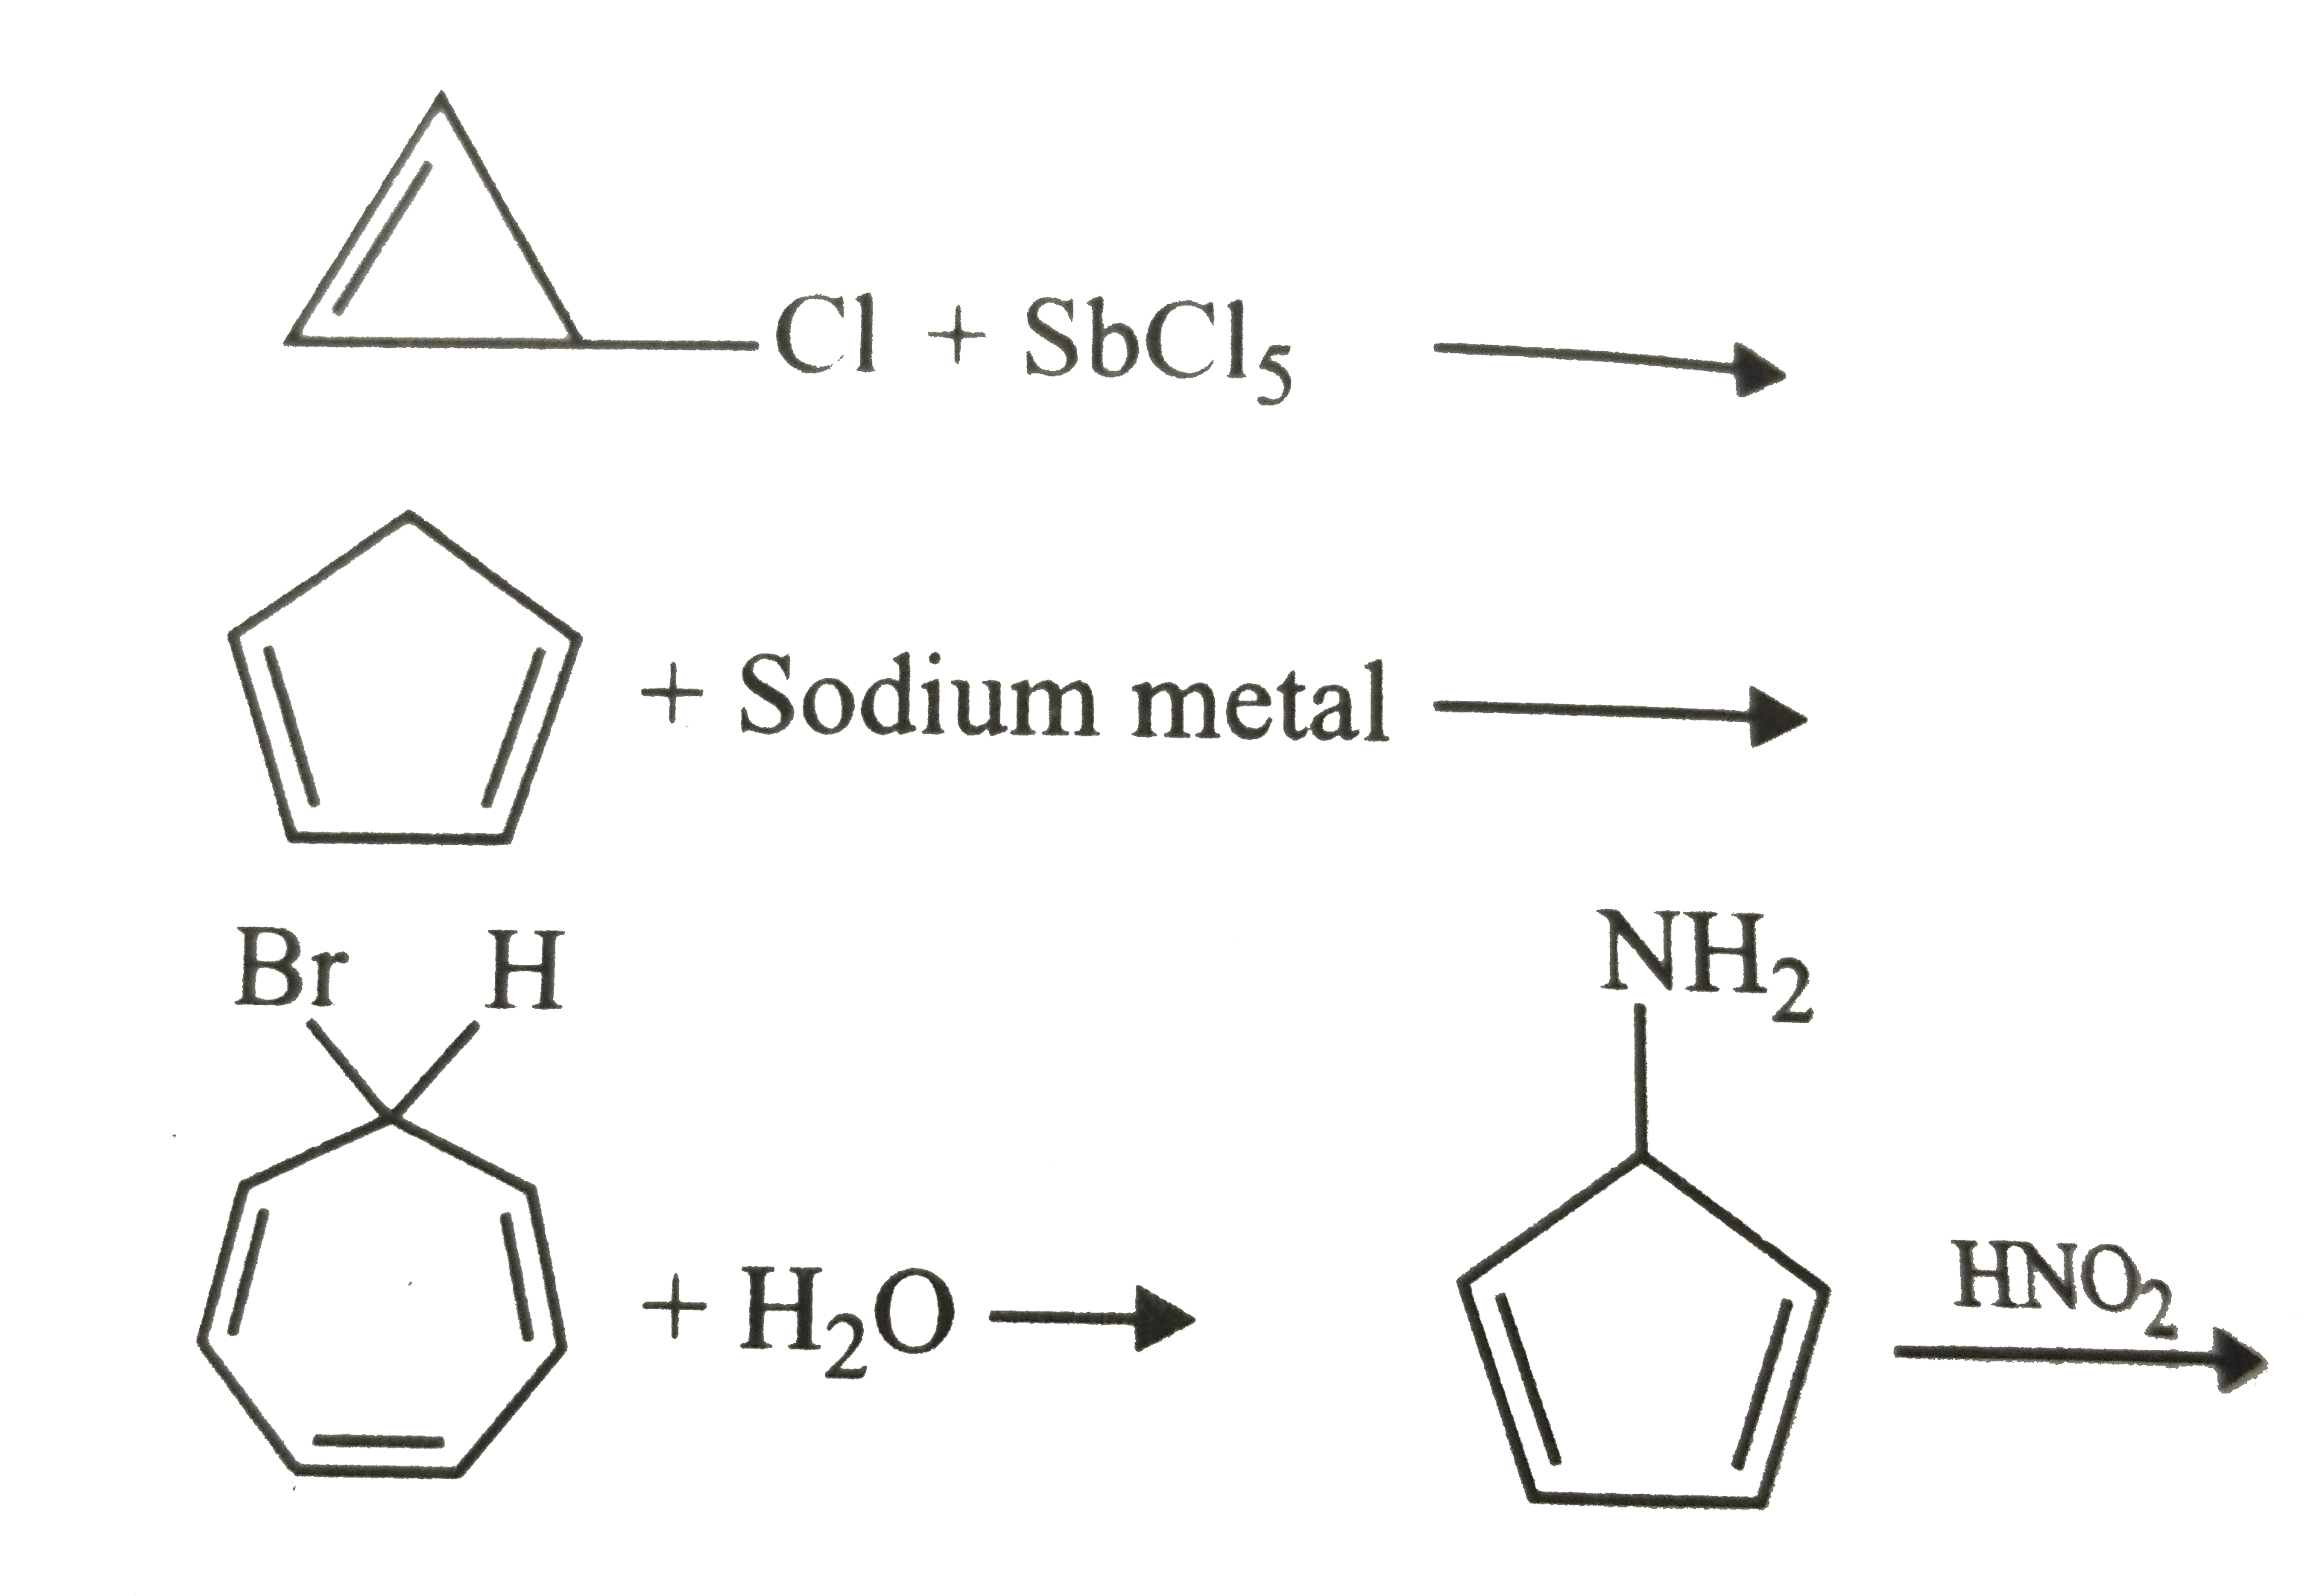 The total number of aromatic species genetic the following reactions is